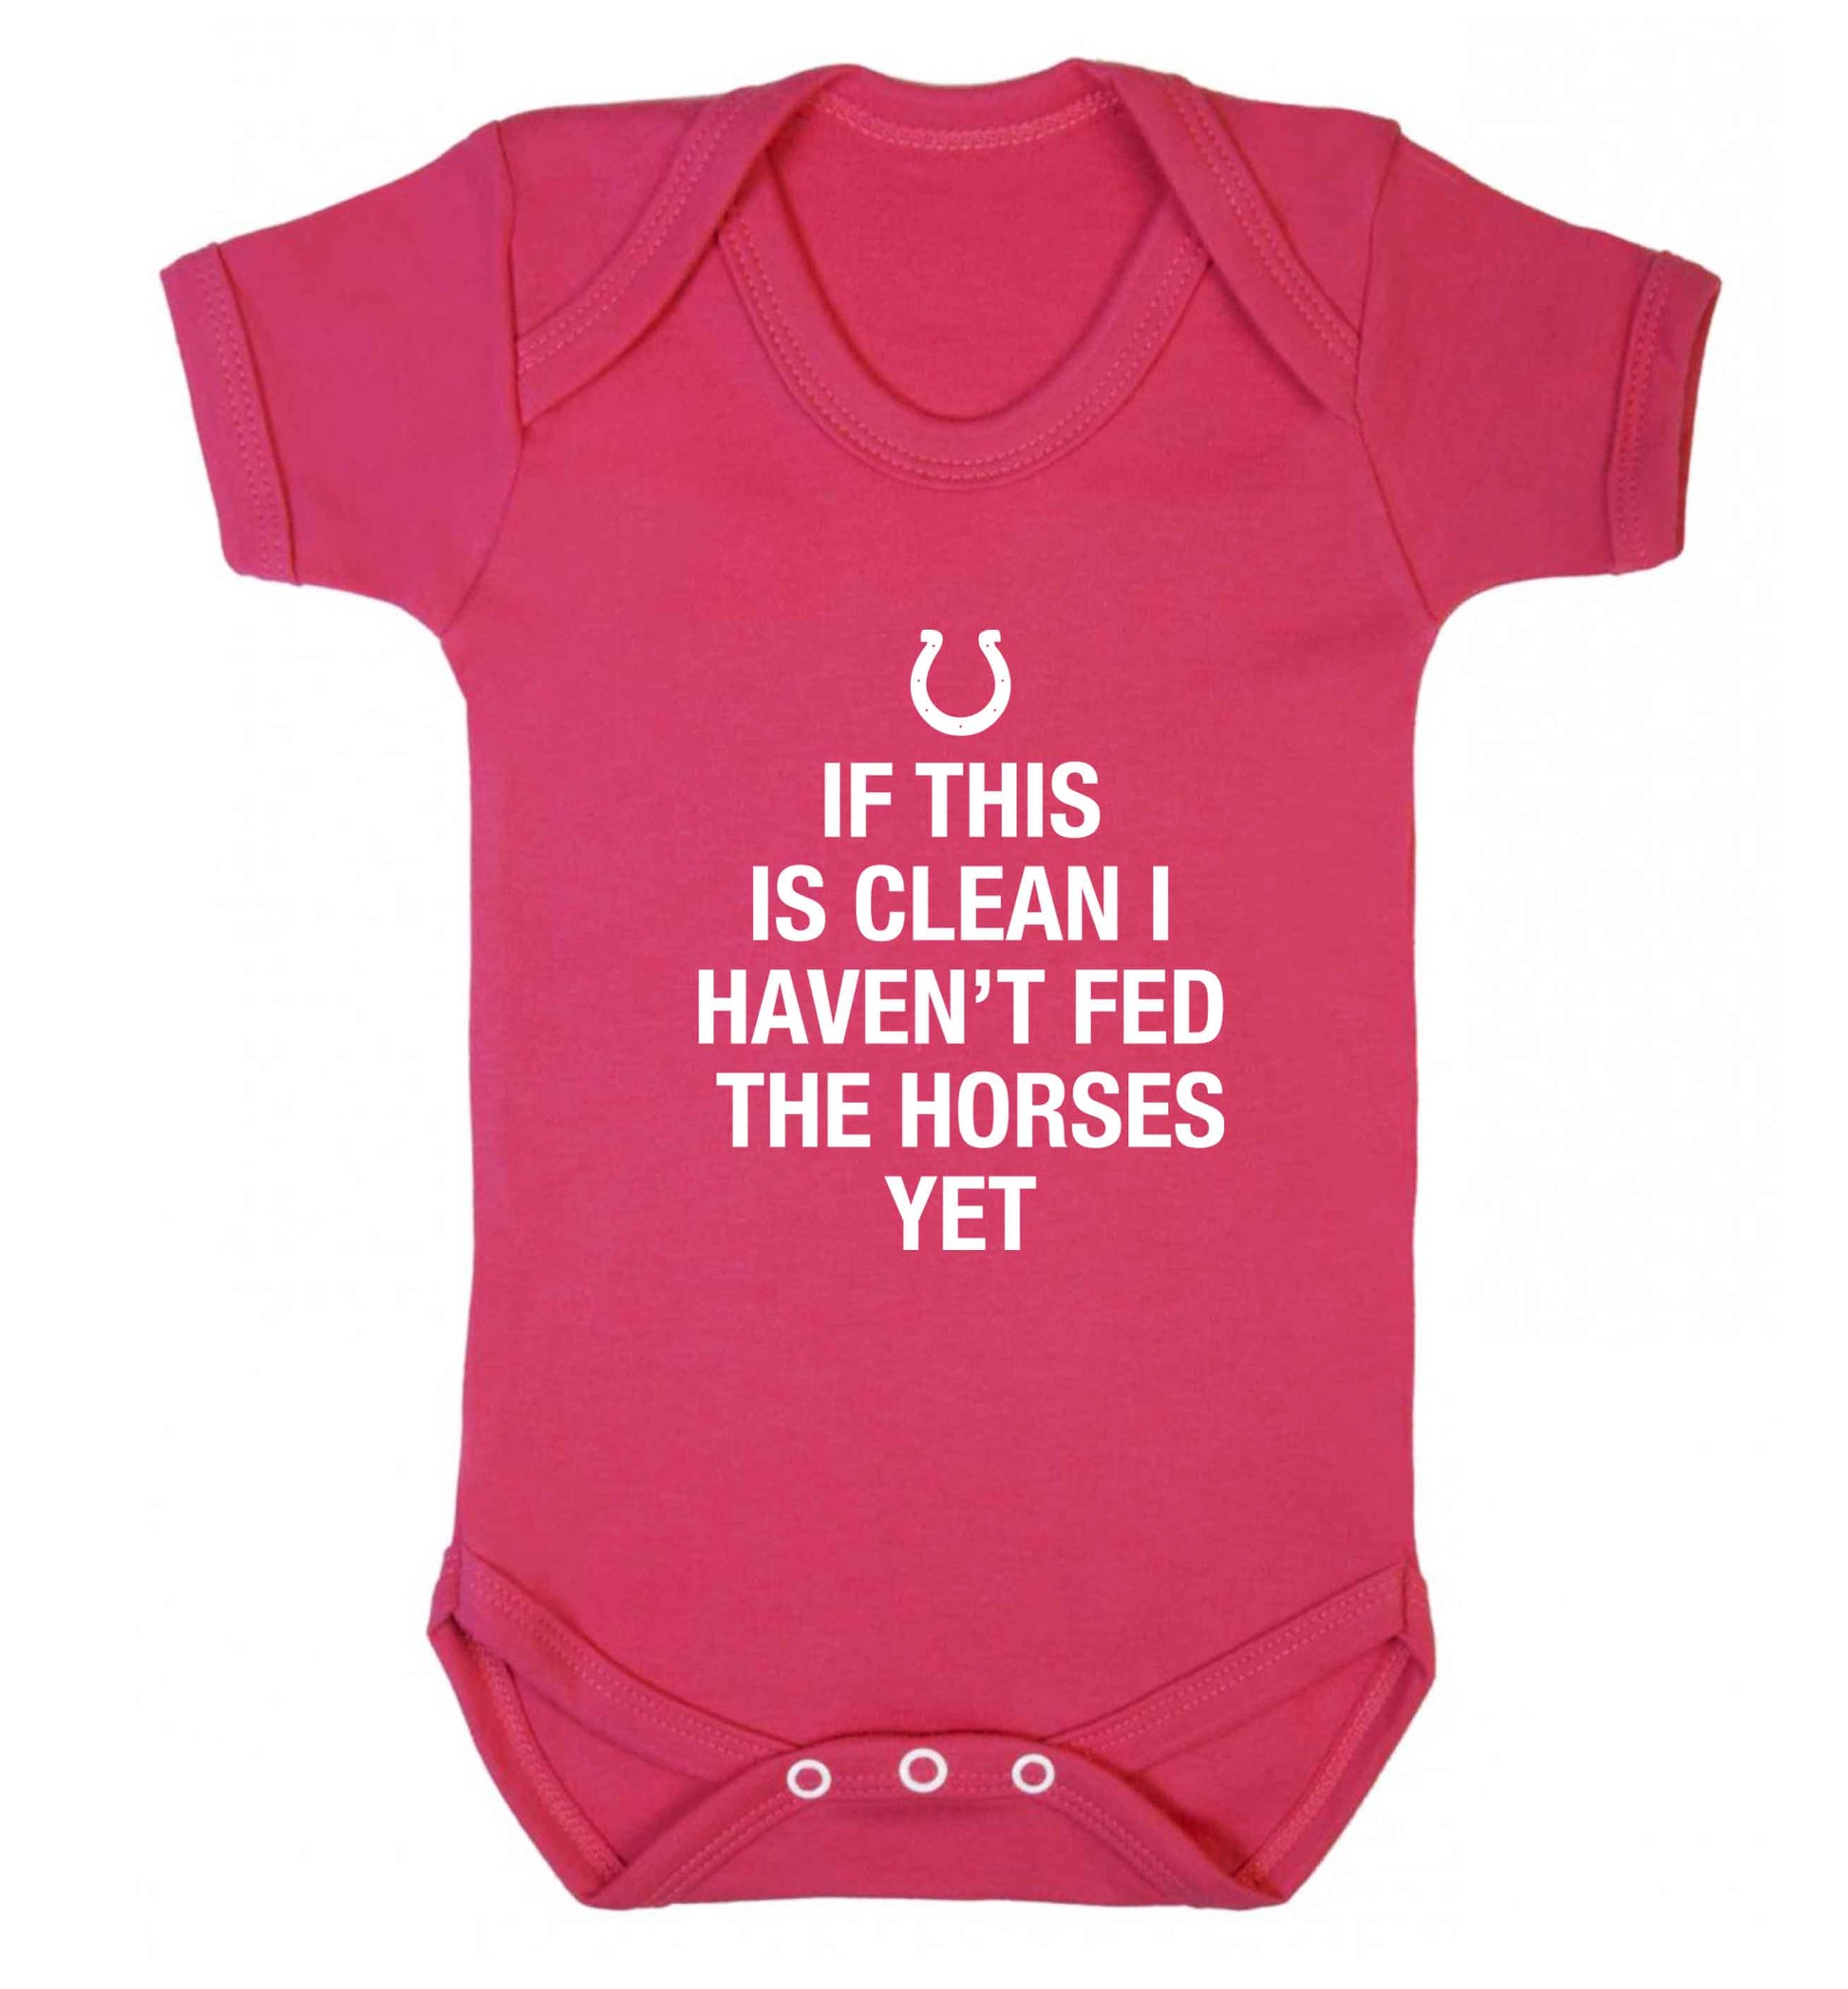 If this isn't clean I haven't fed the horses yet baby vest dark pink 18-24 months